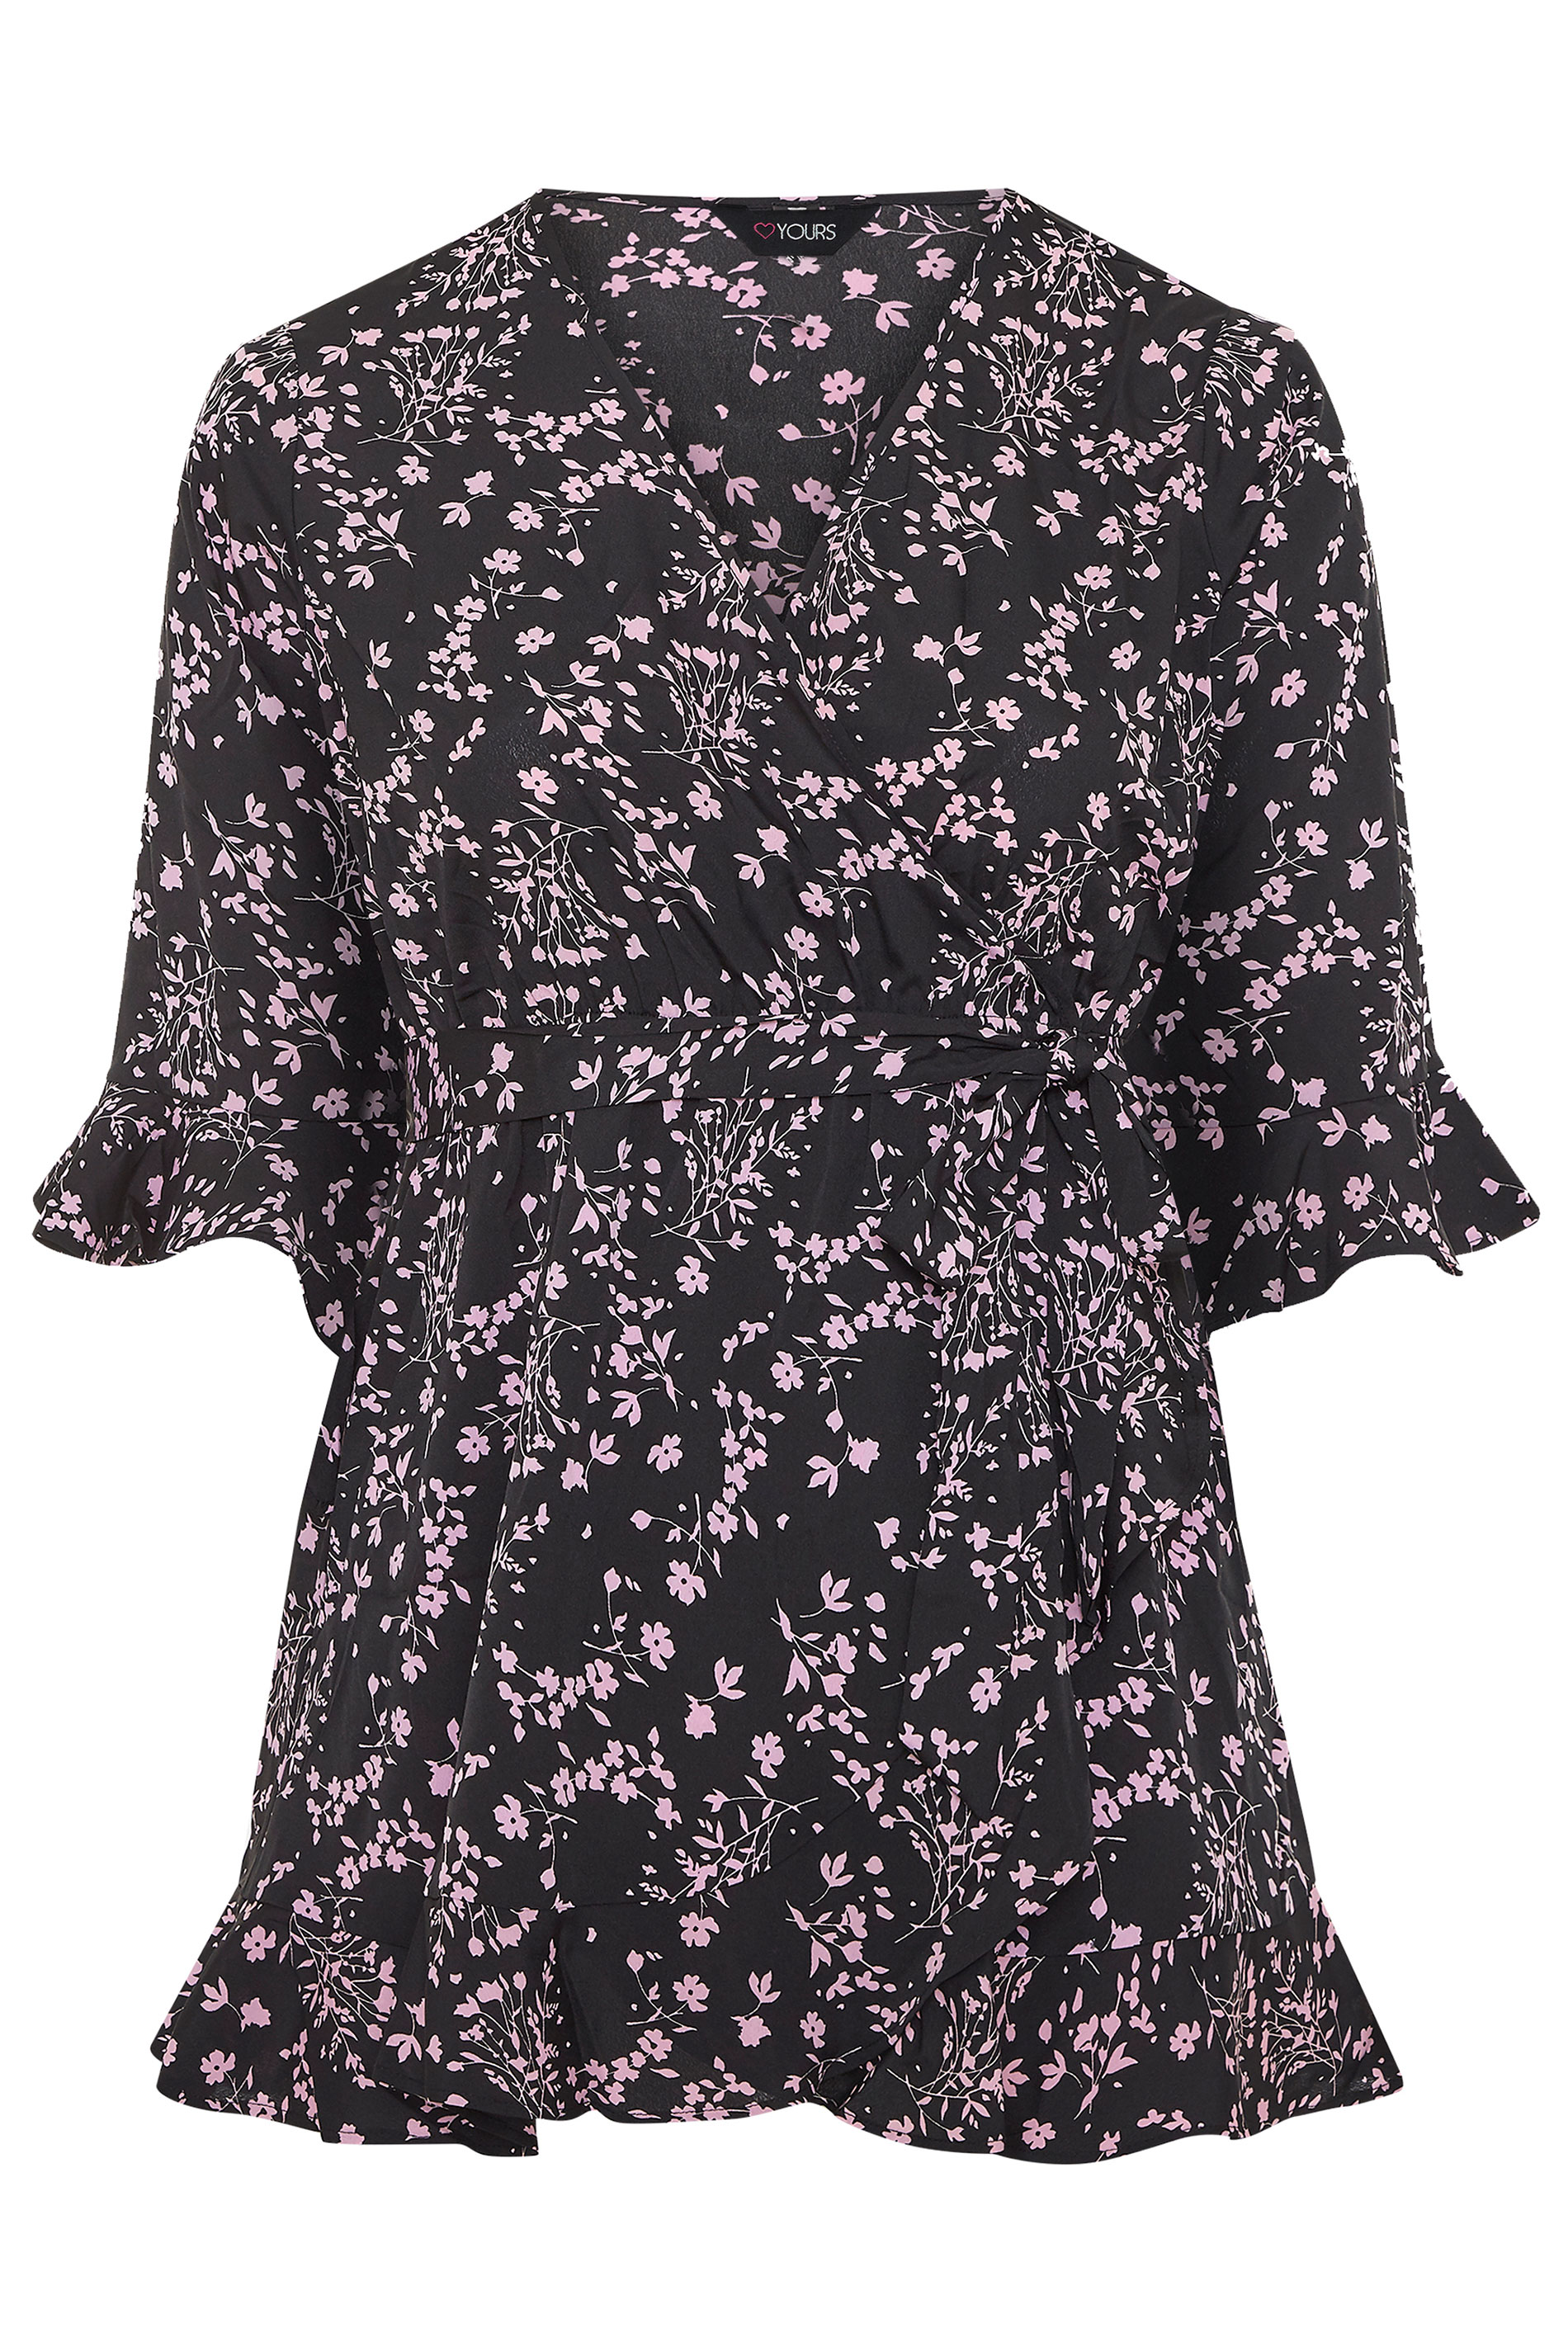 Black & Lilac Floral Wrap Top | Yours Clothing